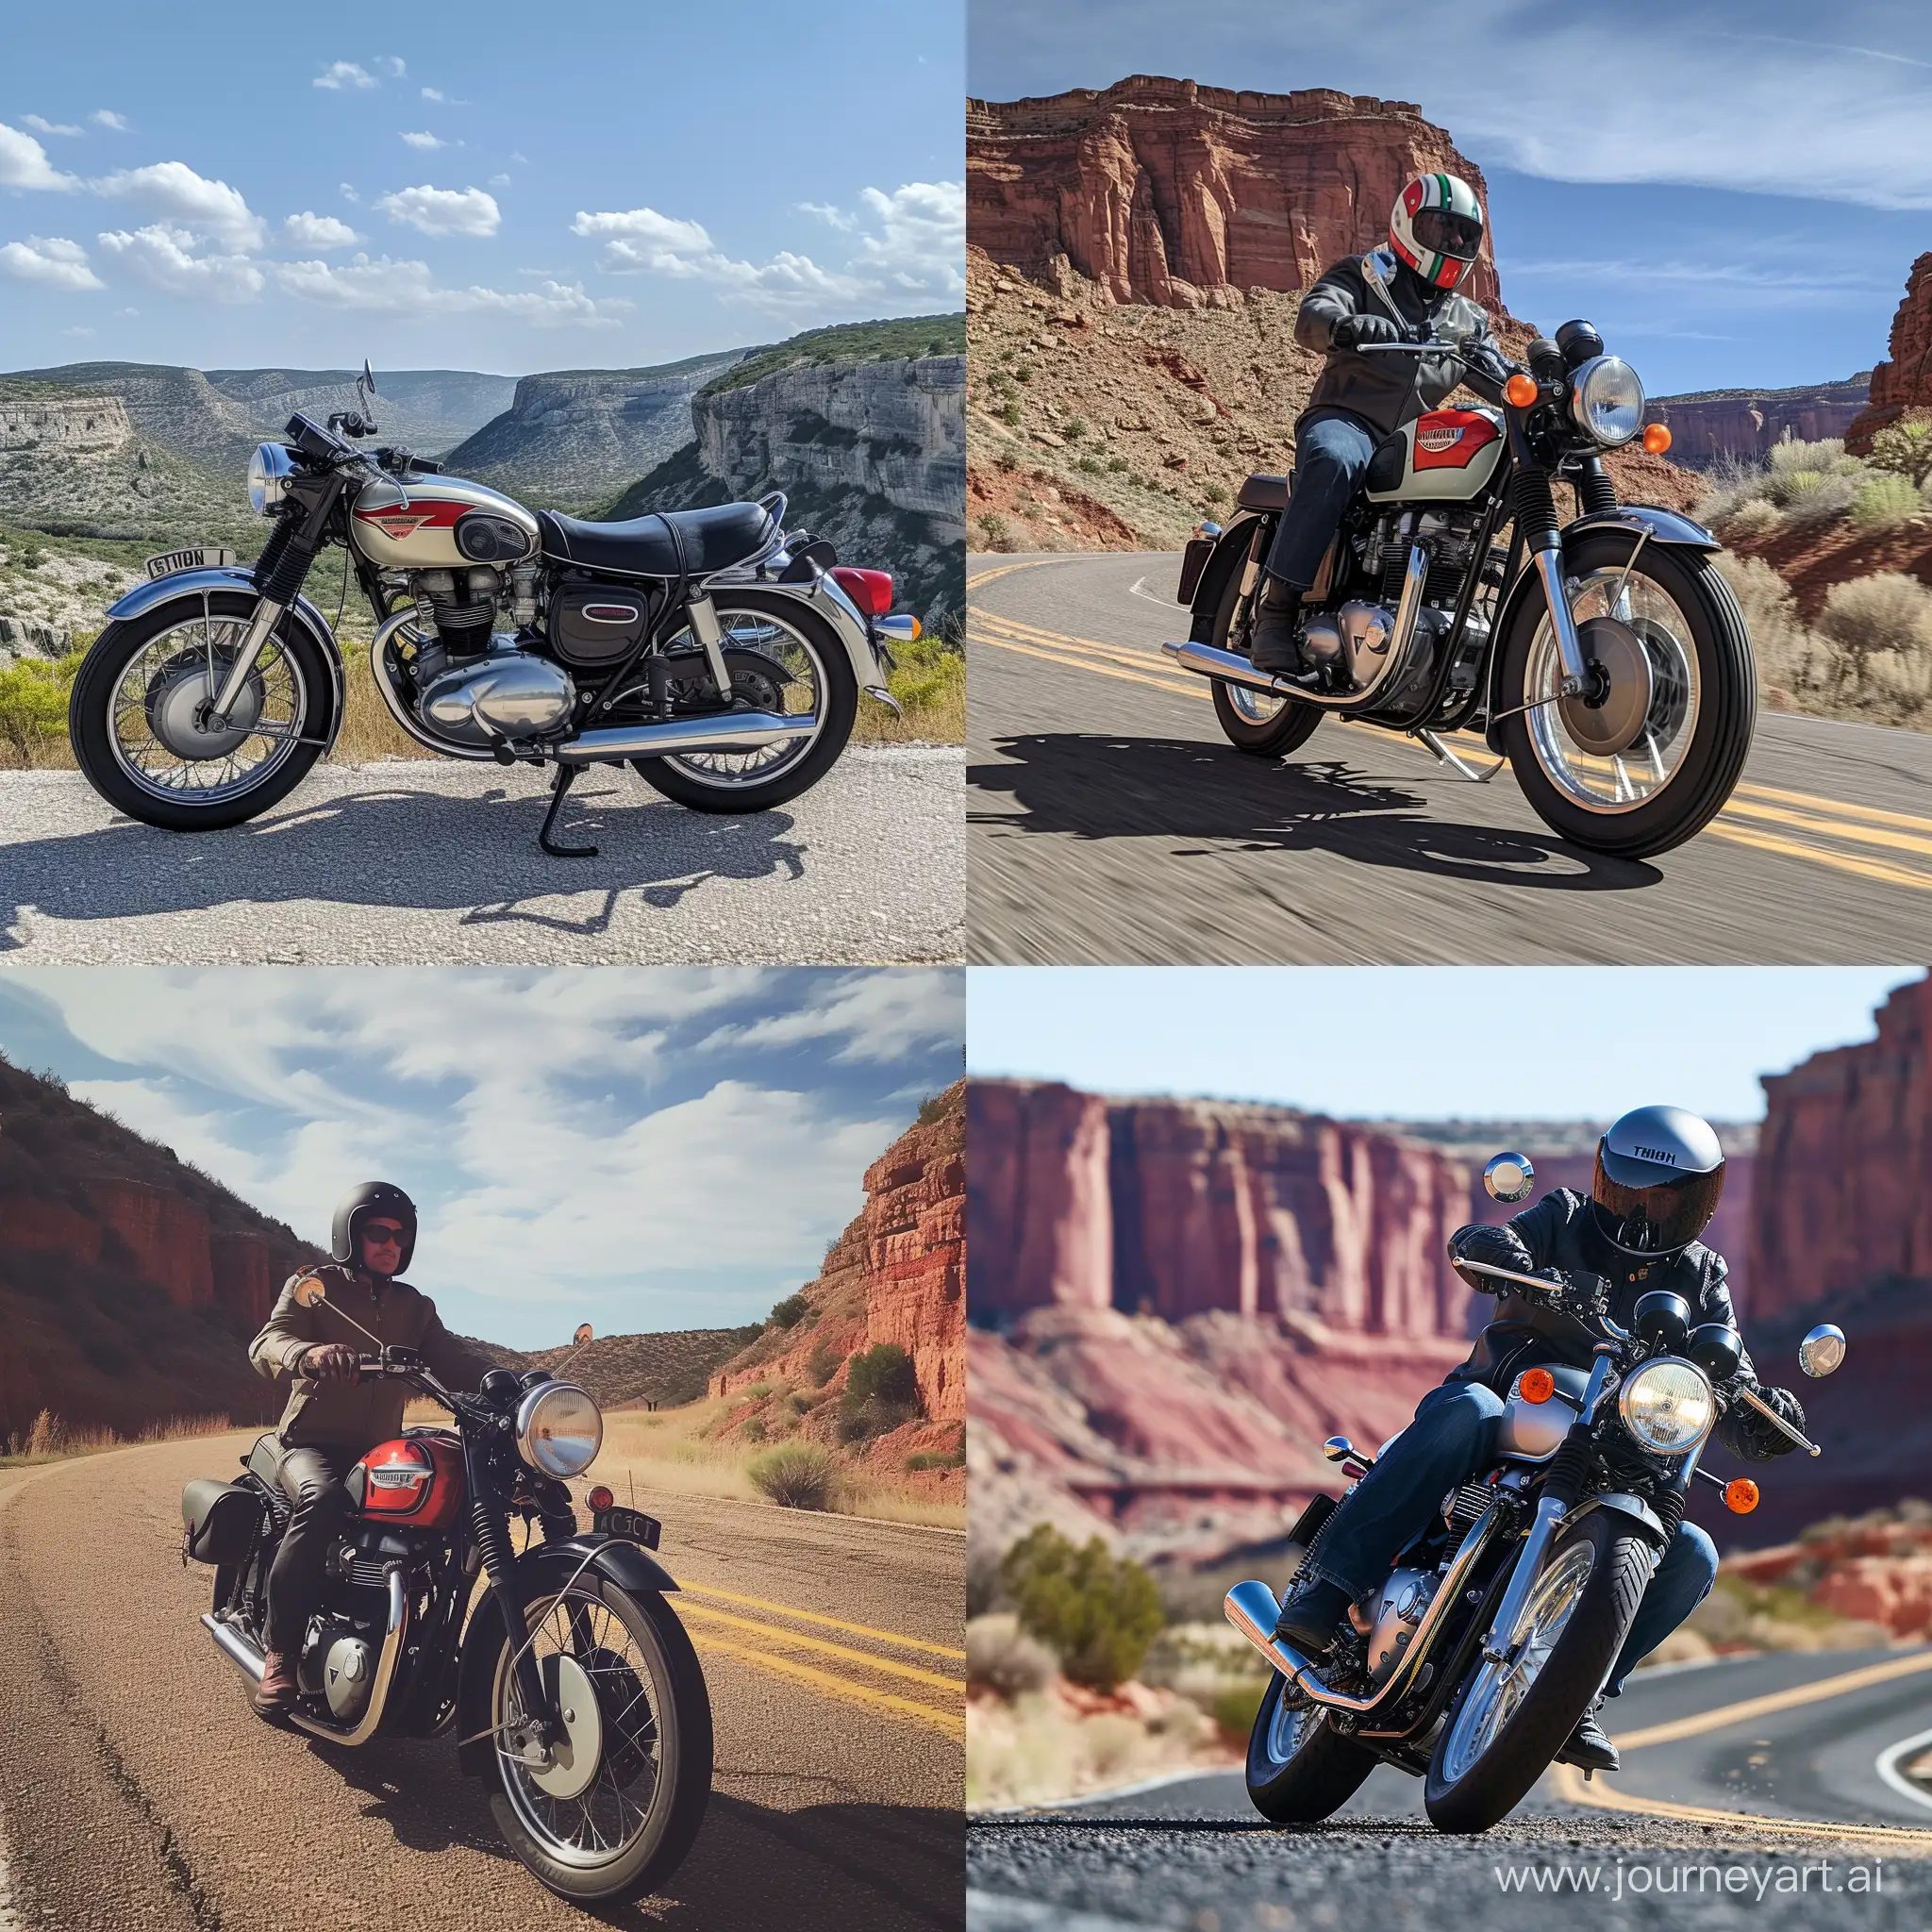 Scenic-Triumph-Motorcycle-Ride-through-Texas-Canyons